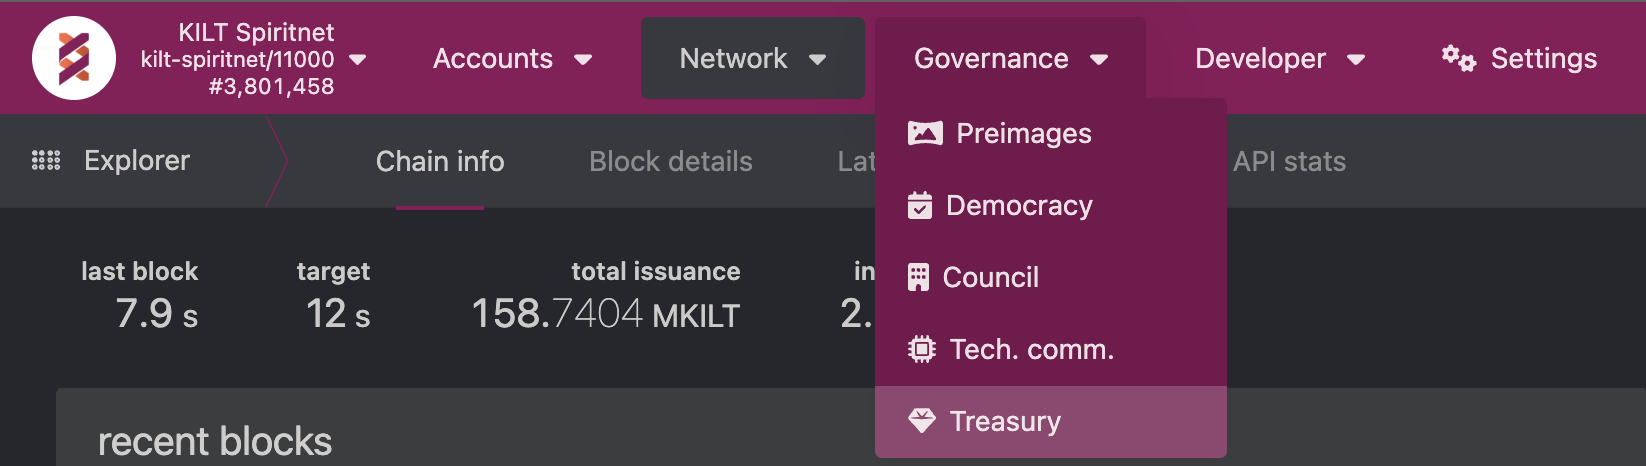 A screenshot showing the Treasury options from the Governance menu